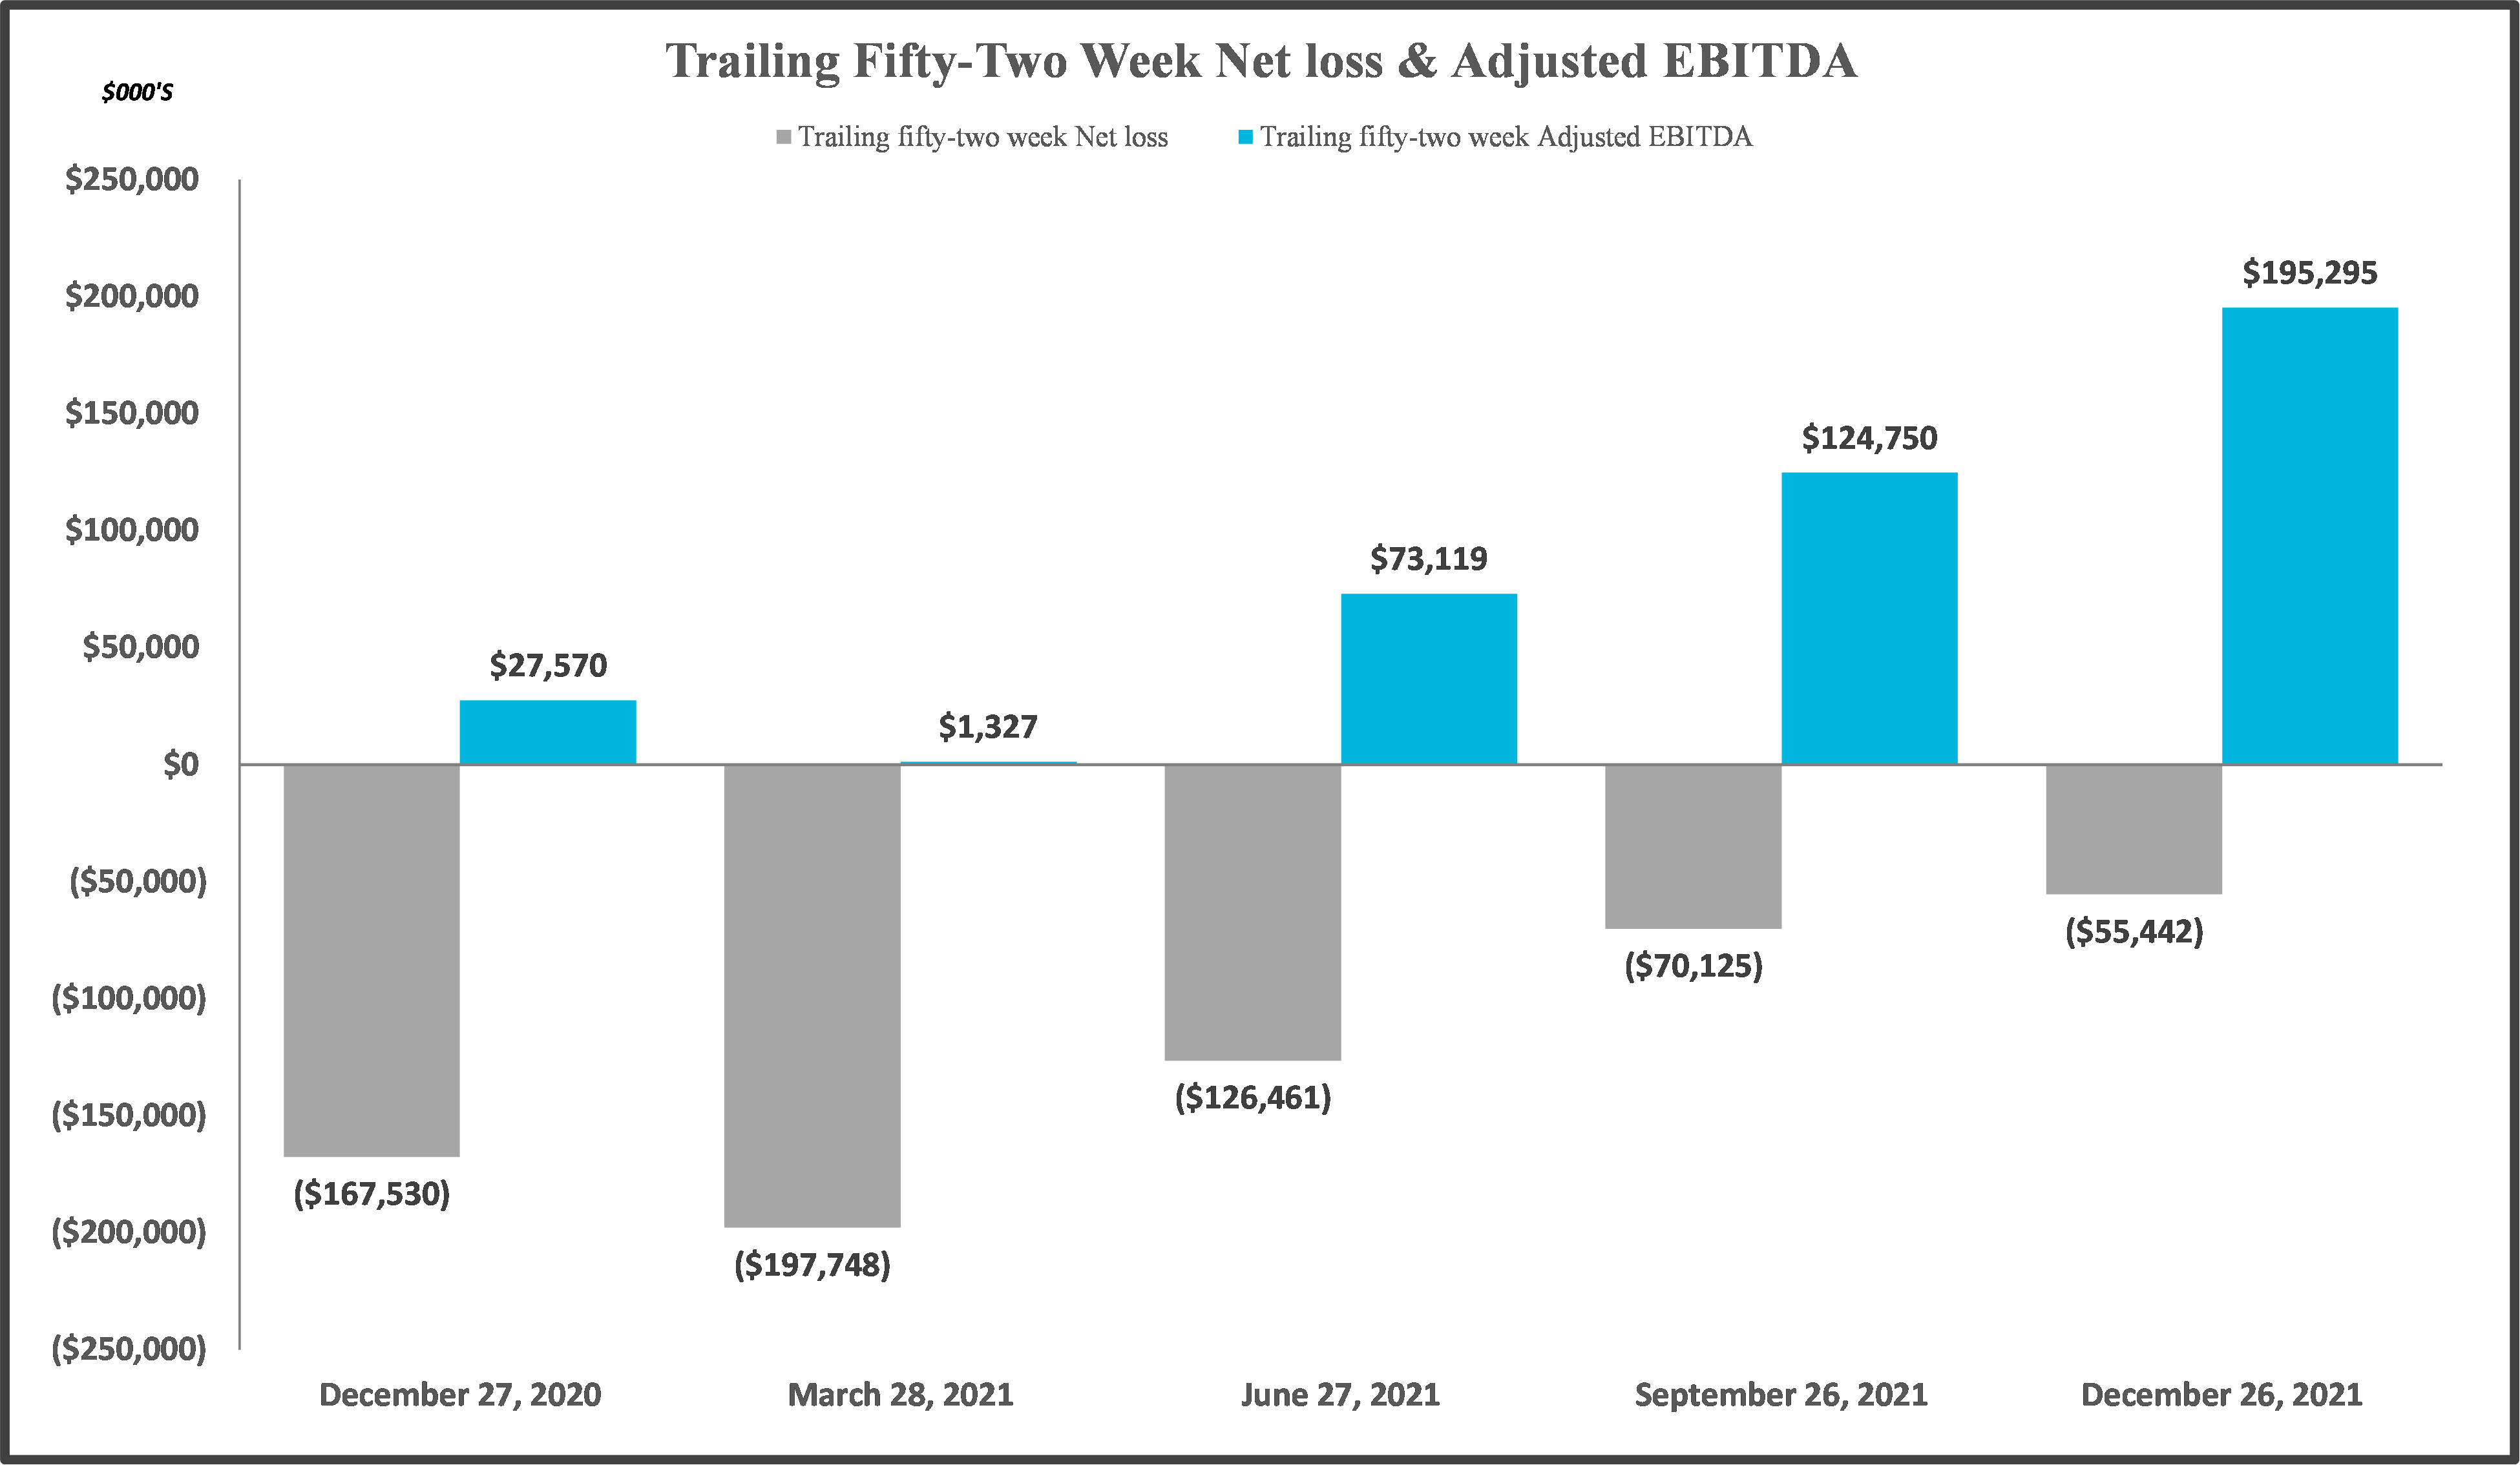 Trailing Fifty-Two Week Net Loss & Adjusted EBITDA